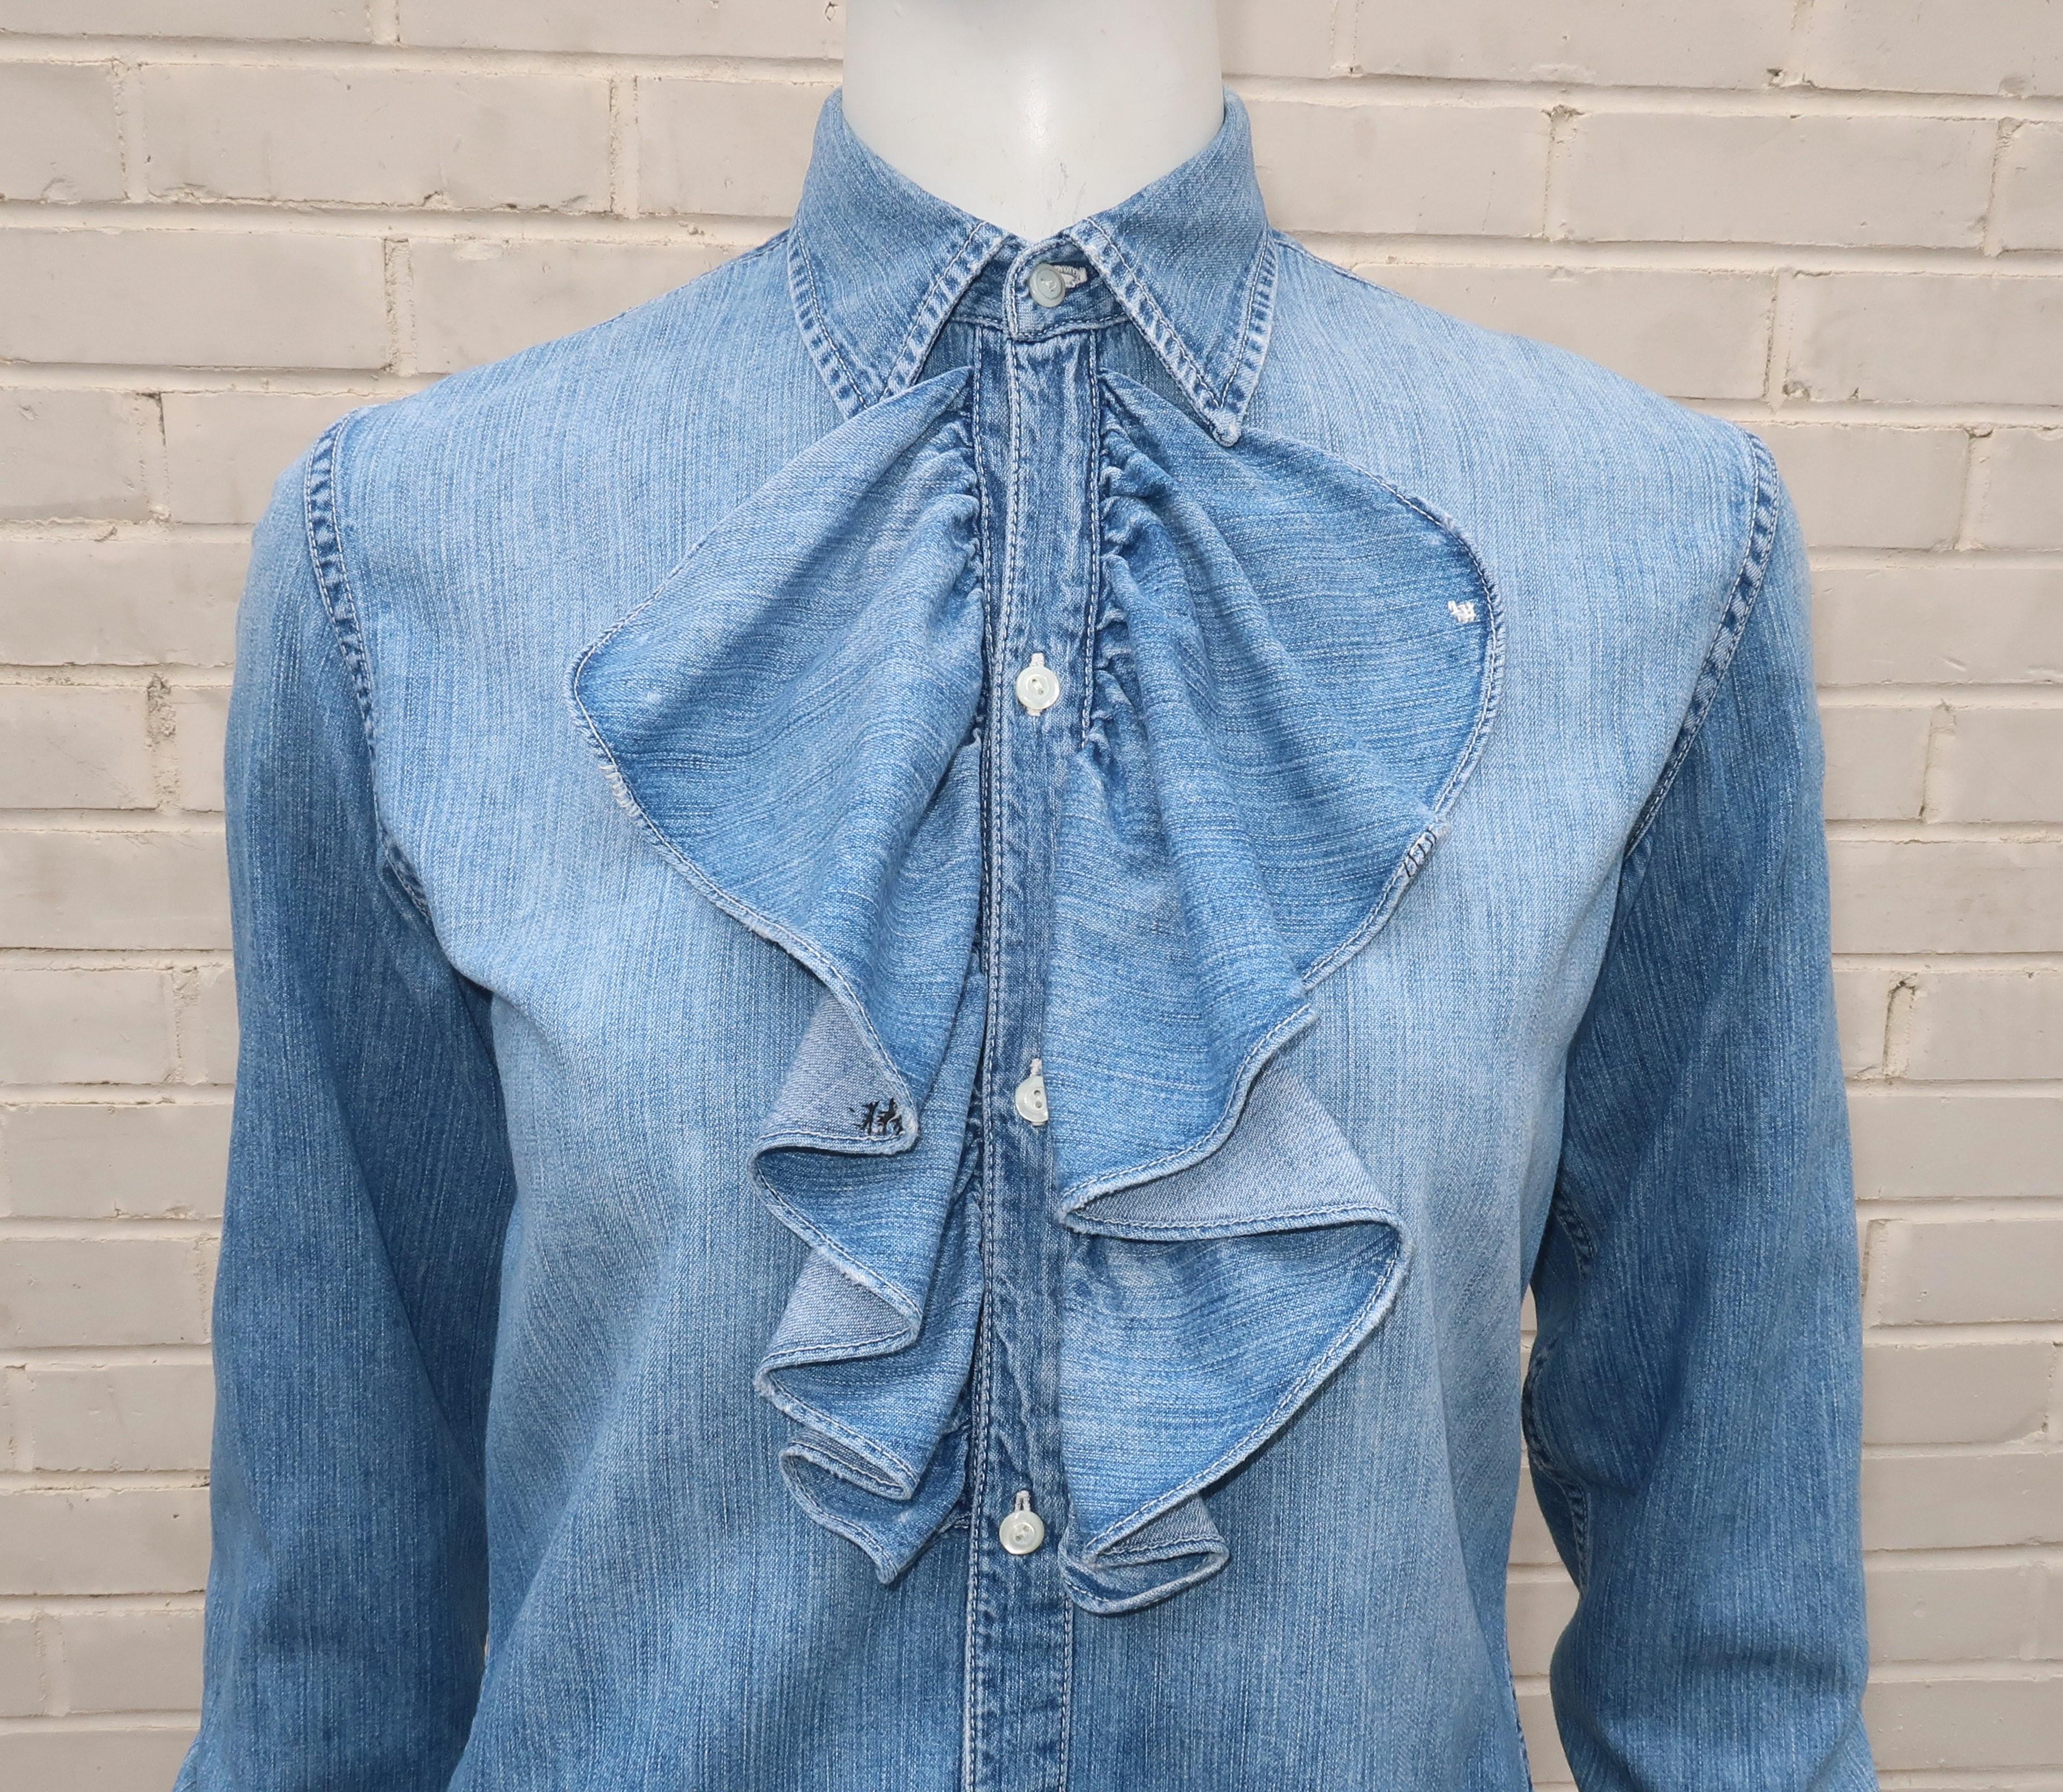 1990's Ralph Lauren distressed denim shirt combining menswear details with a feminine ruffle for a great vintage look that epitomizes Mr. Lauren's all-American style.  Perfect paired with his Western wear or Santa Fe collection ... and ideal with